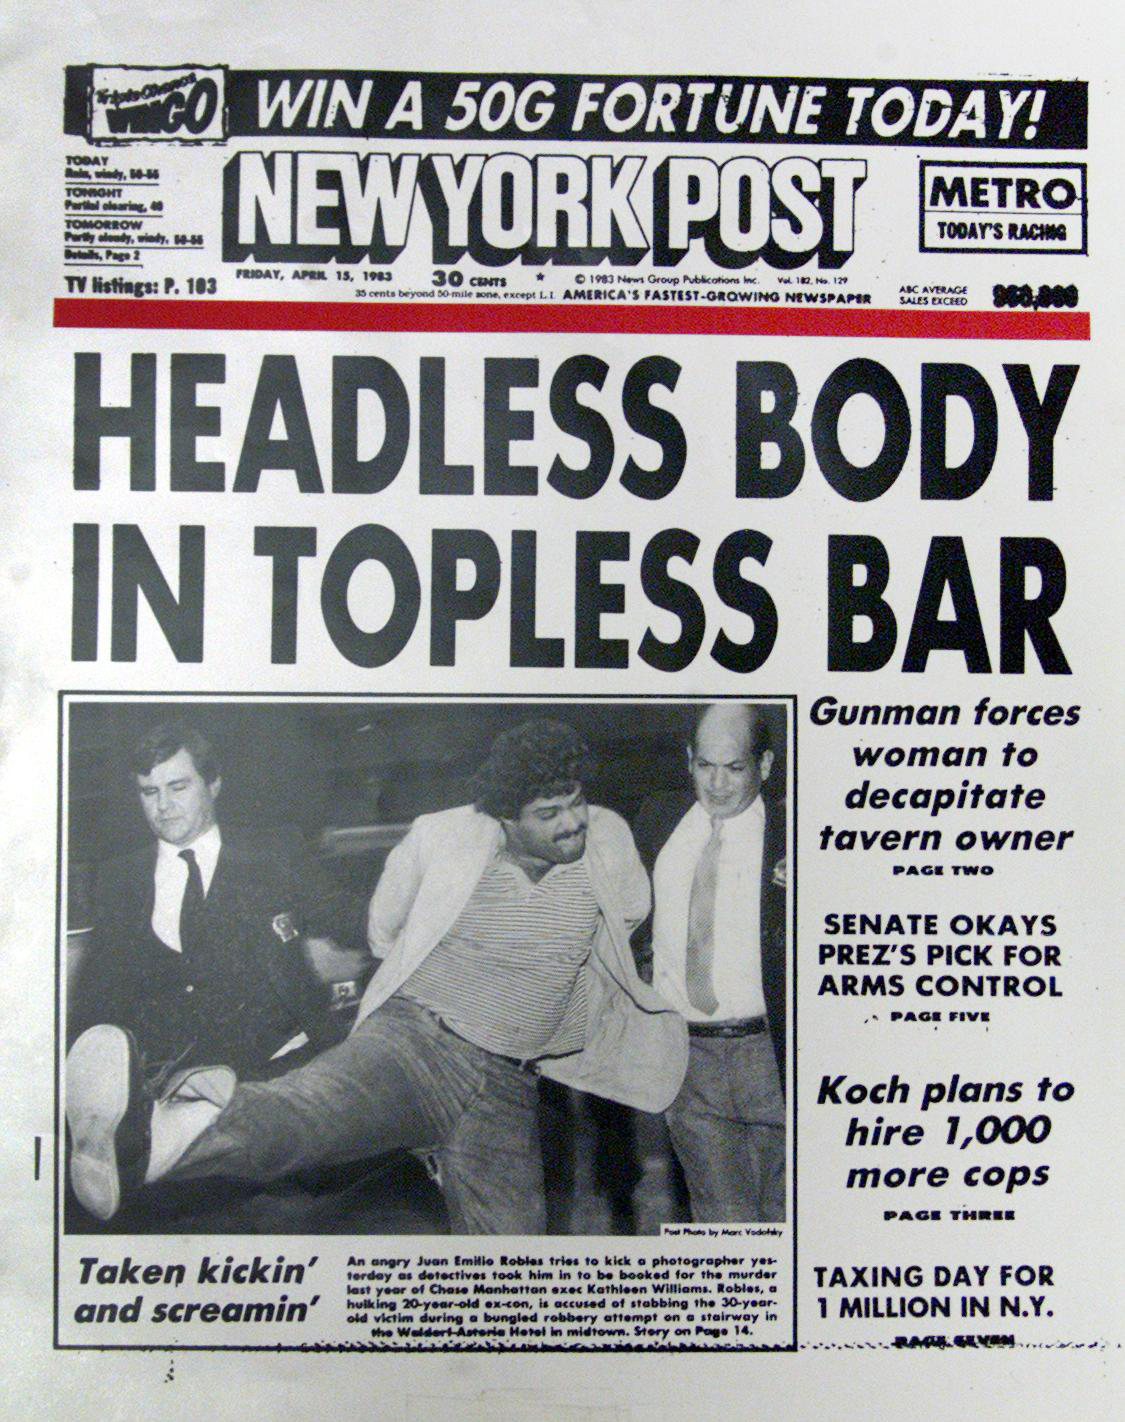 The New York Post front page on April 15, 1983.